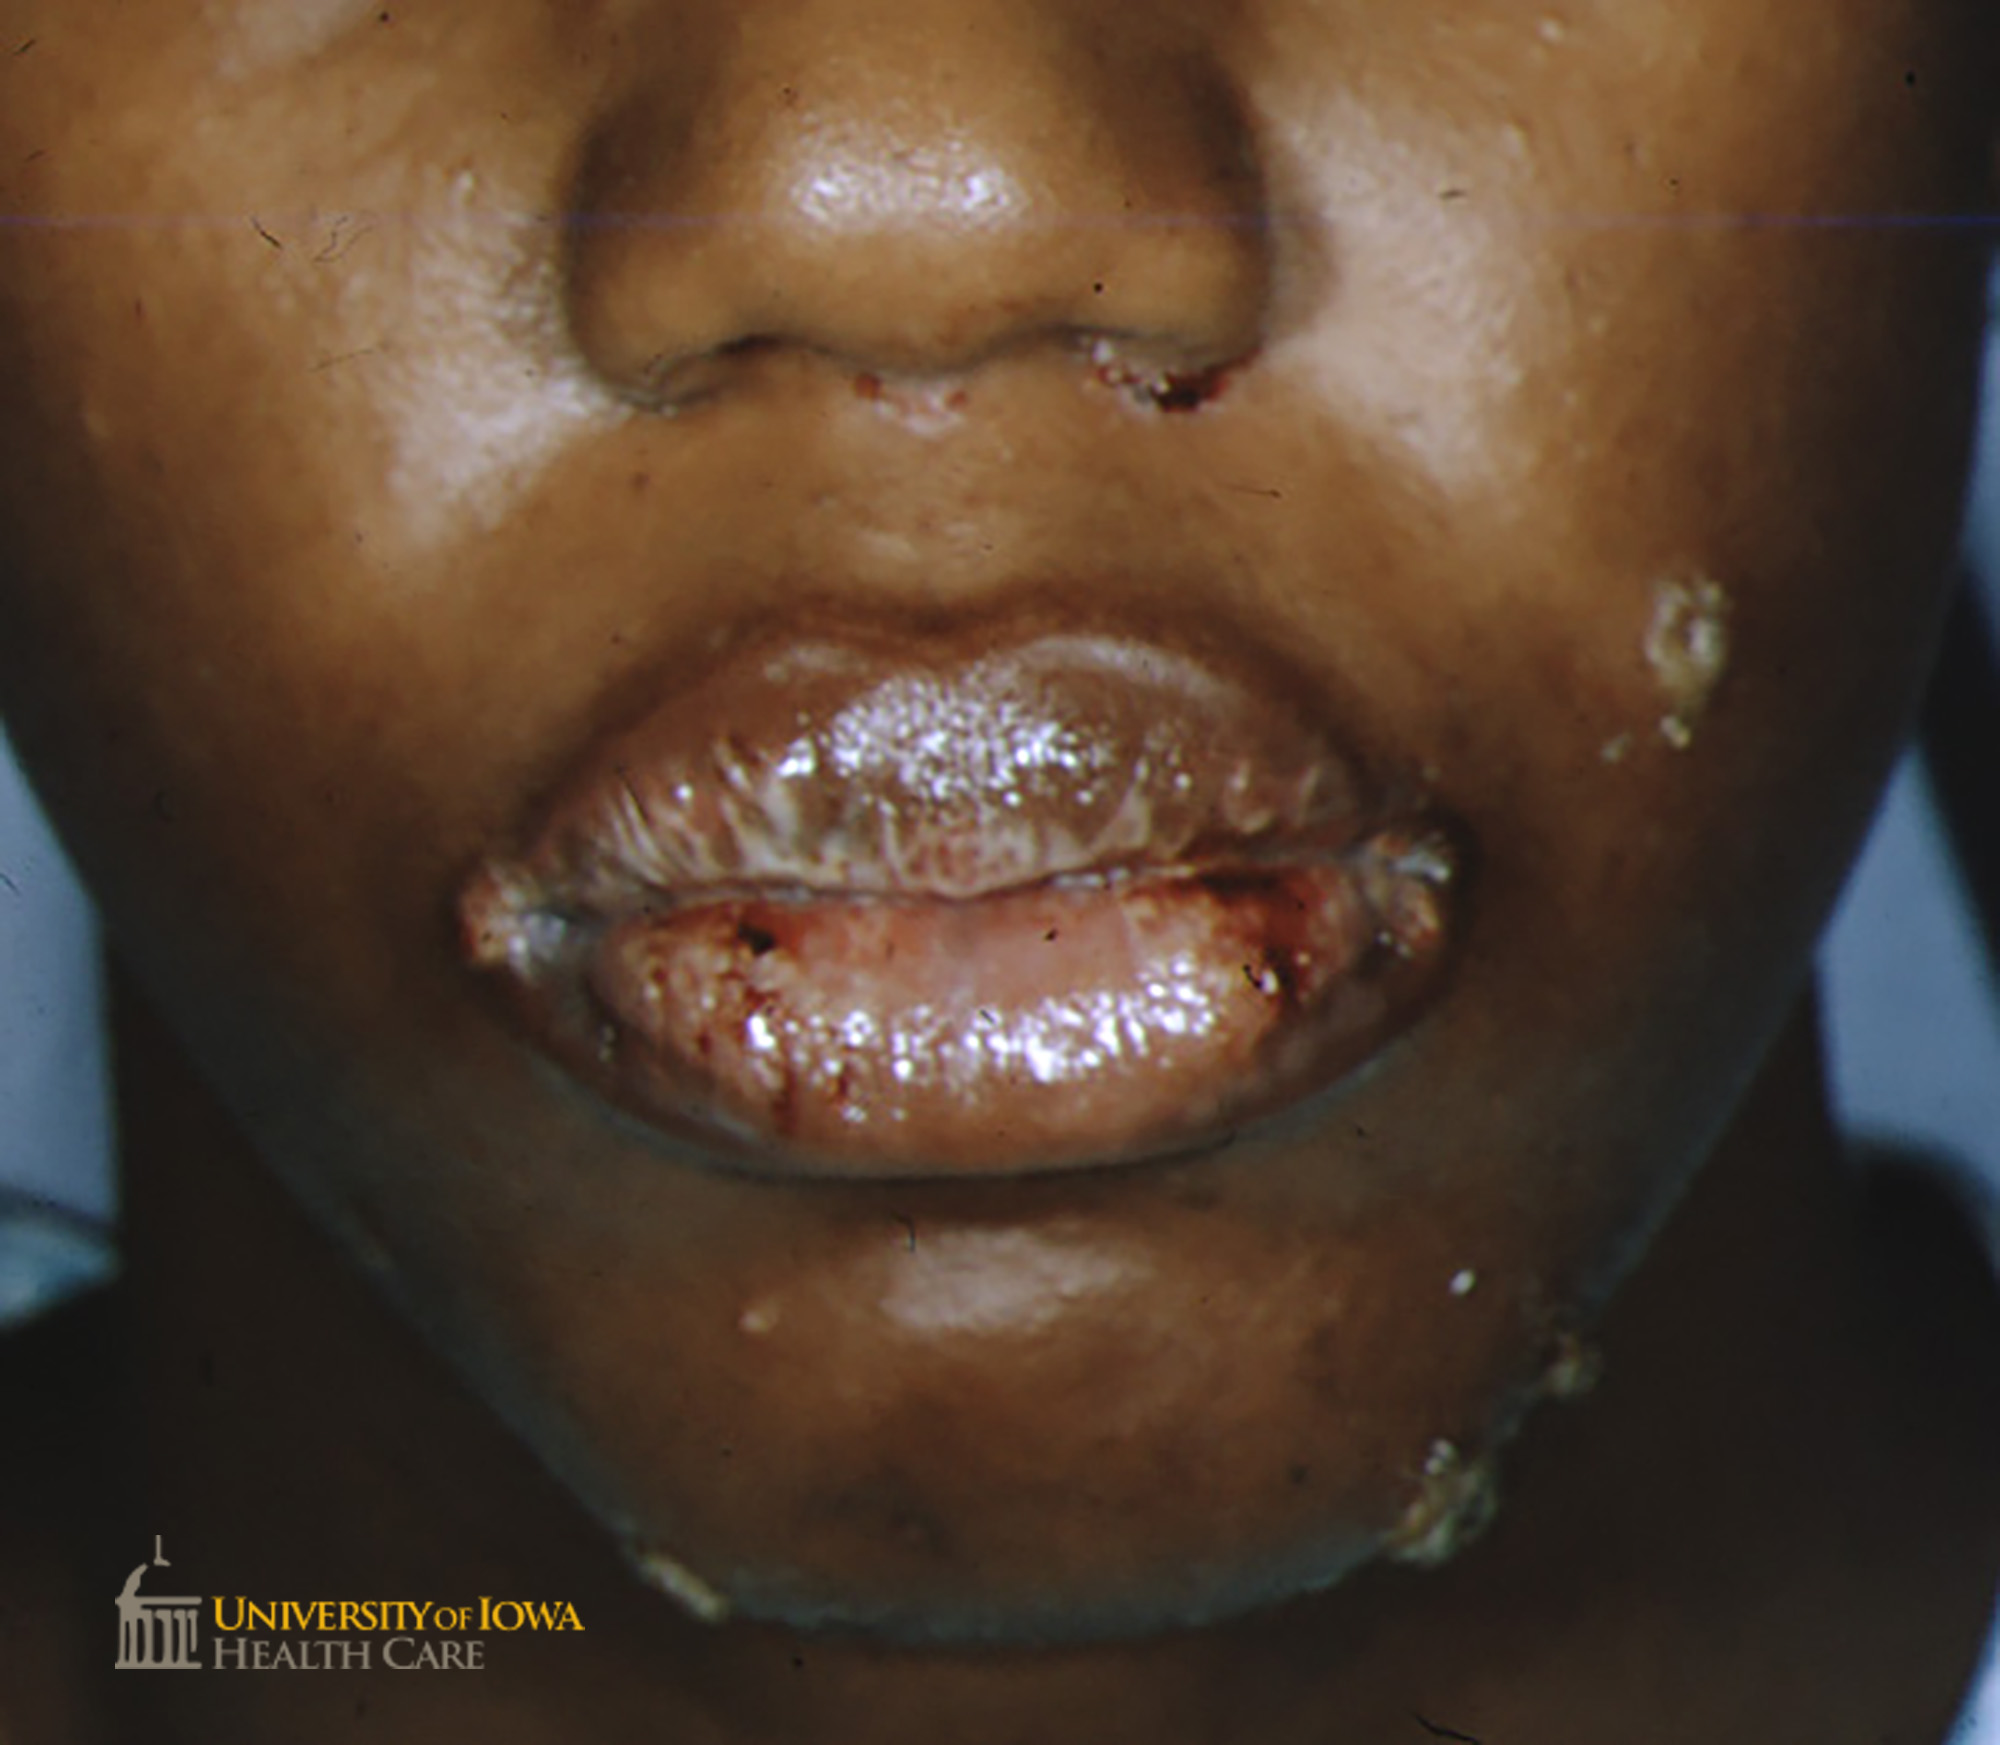 Superficial erosions, some with hemorrhagic crusting and scale, on the lips and face. (click images for higher resolution).